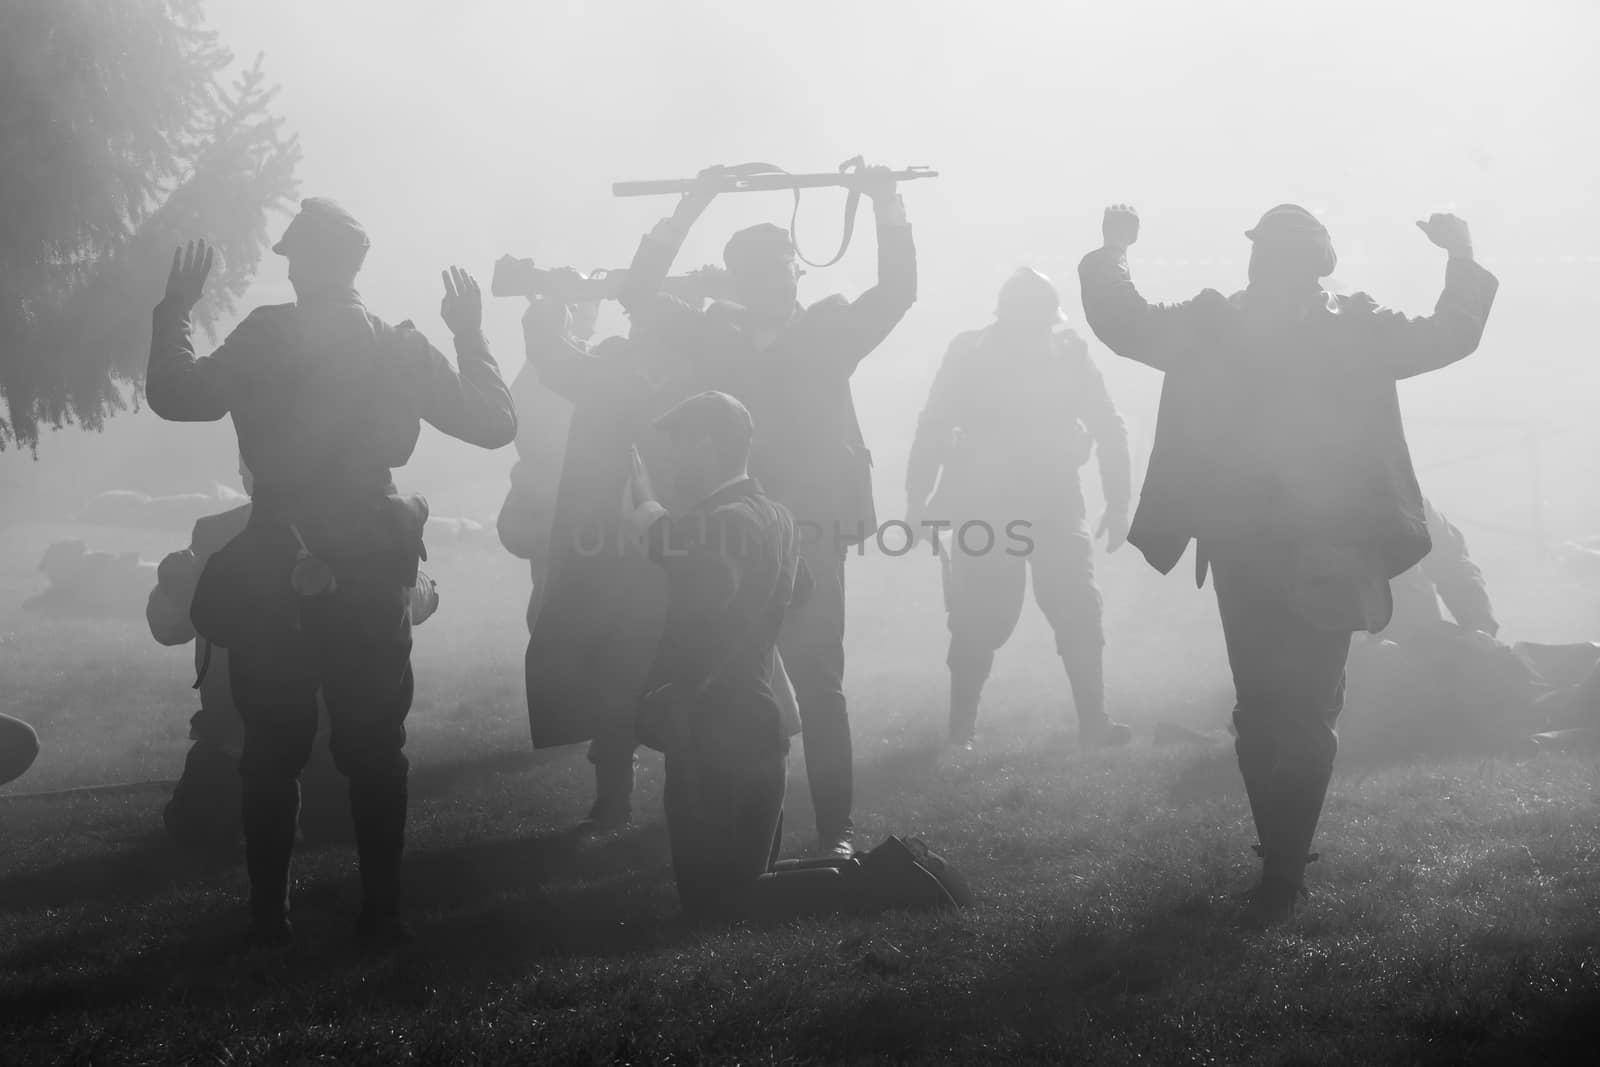 Silhouettes of Soldiers in uniforms during War with rifles on battlefield. All area is in smoke and sunrays peeking thru. There are hostages in the picture. by petrsvoboda91